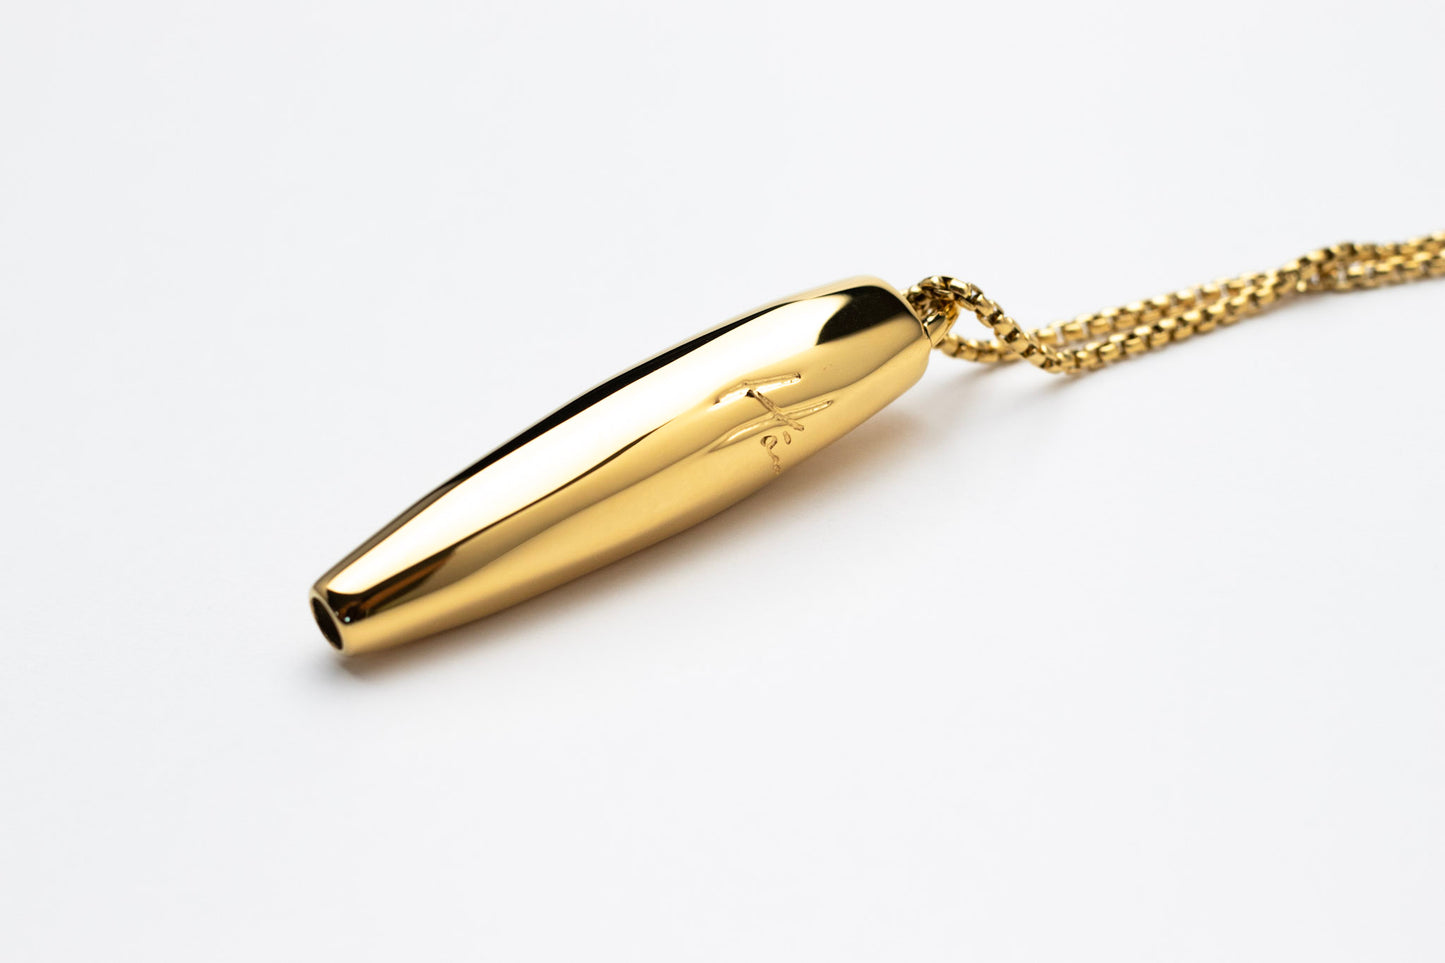 anxiety necklace, anxiety whistle, gold necklace, nz jewelry, high quality, ha tool, ha habit, 